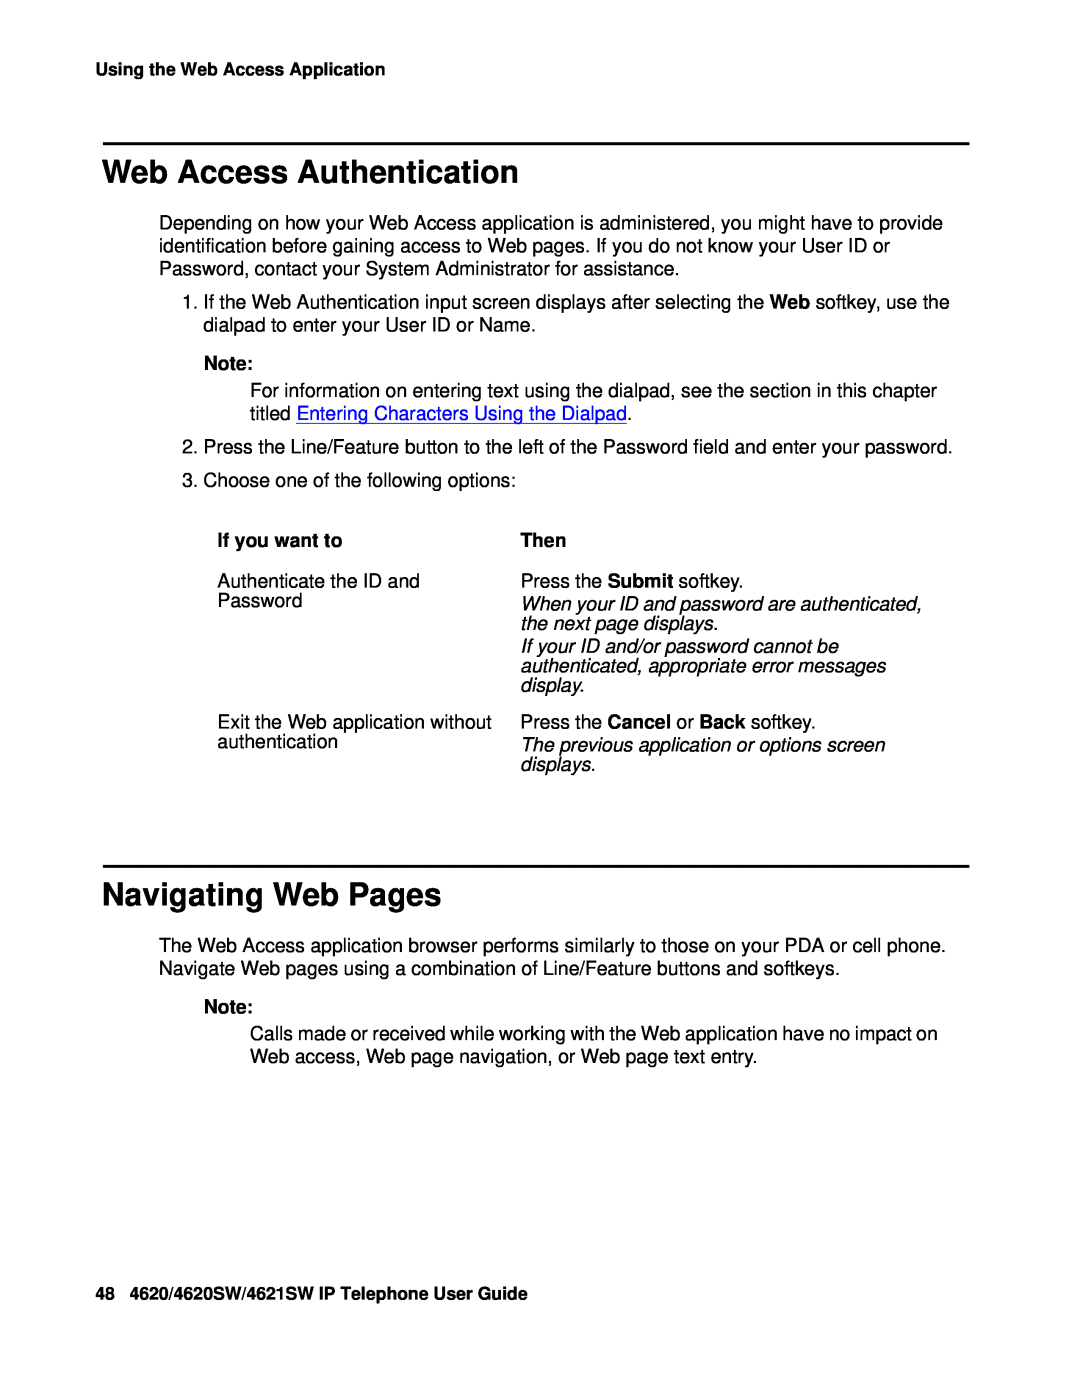 Avaya 4620SW, 4621SW manual Web Access Authentication, Navigating Web Pages 